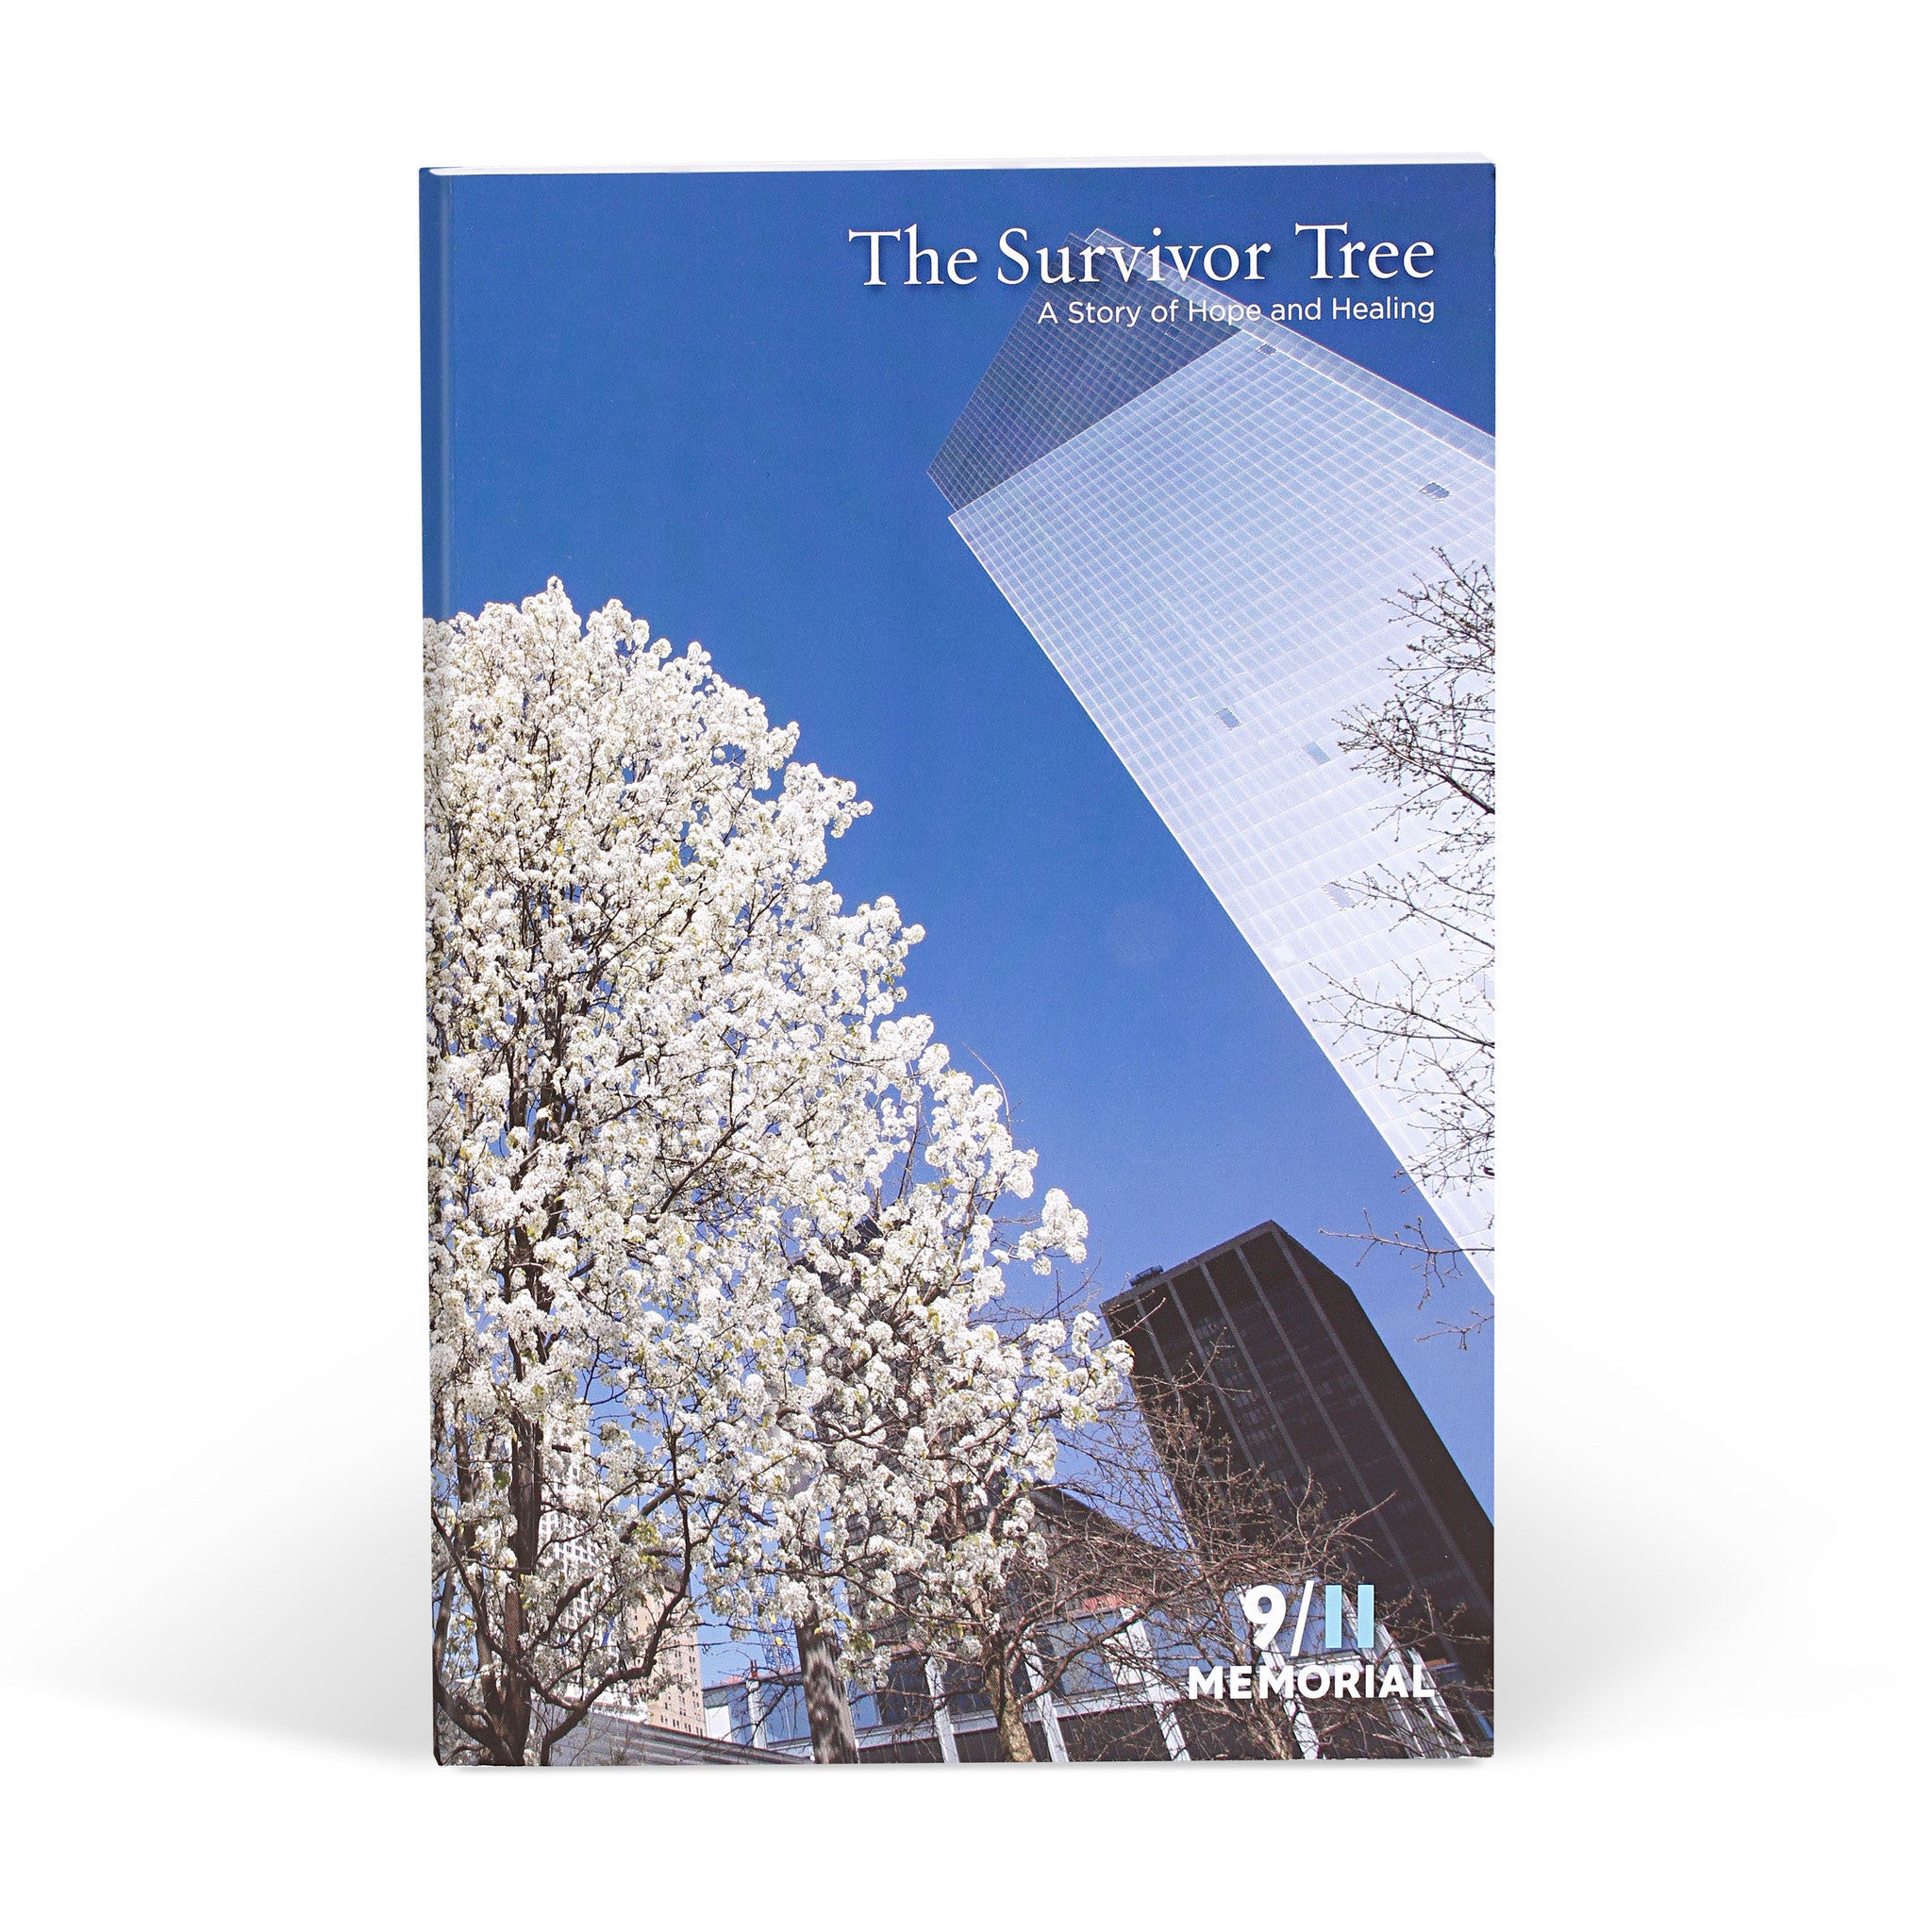 Hear the story of the 9/11 Survivor Tree, a symbol of hope and resilience, E-News